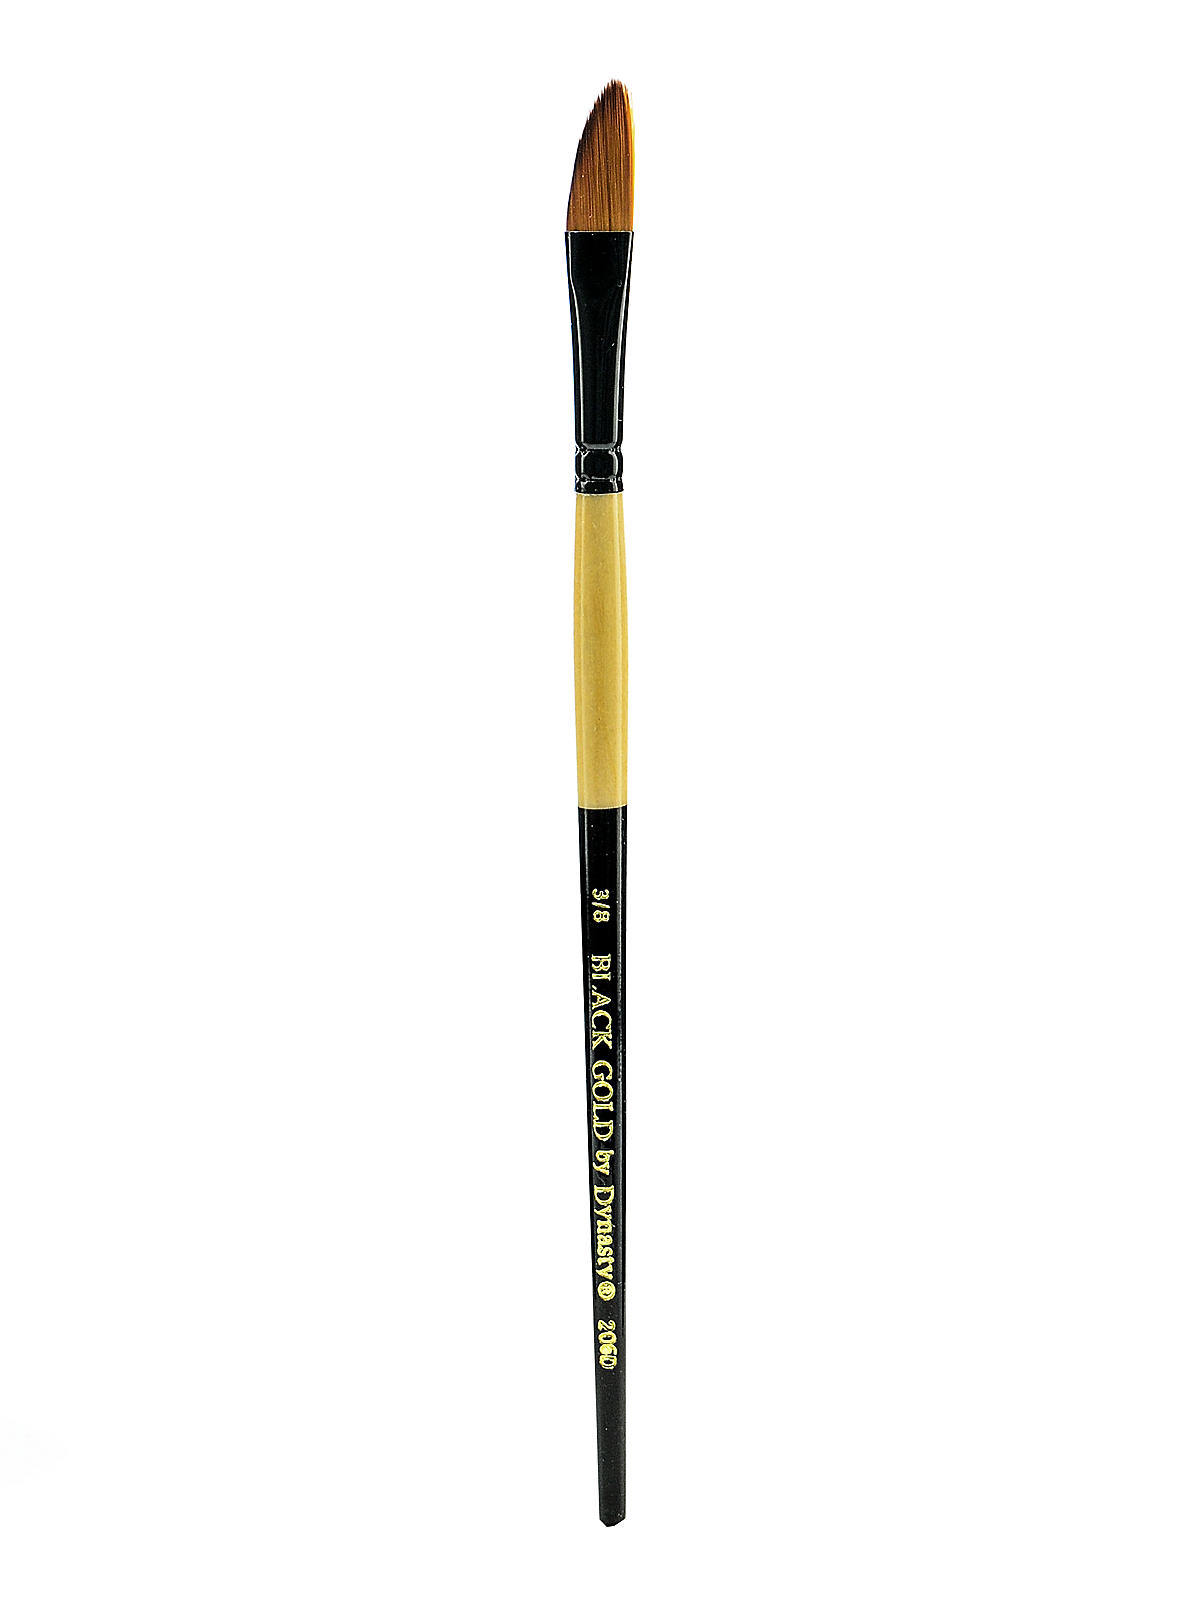 Black Gold Series Synthetic Brushes Short Handle 3 8 In. Dagger